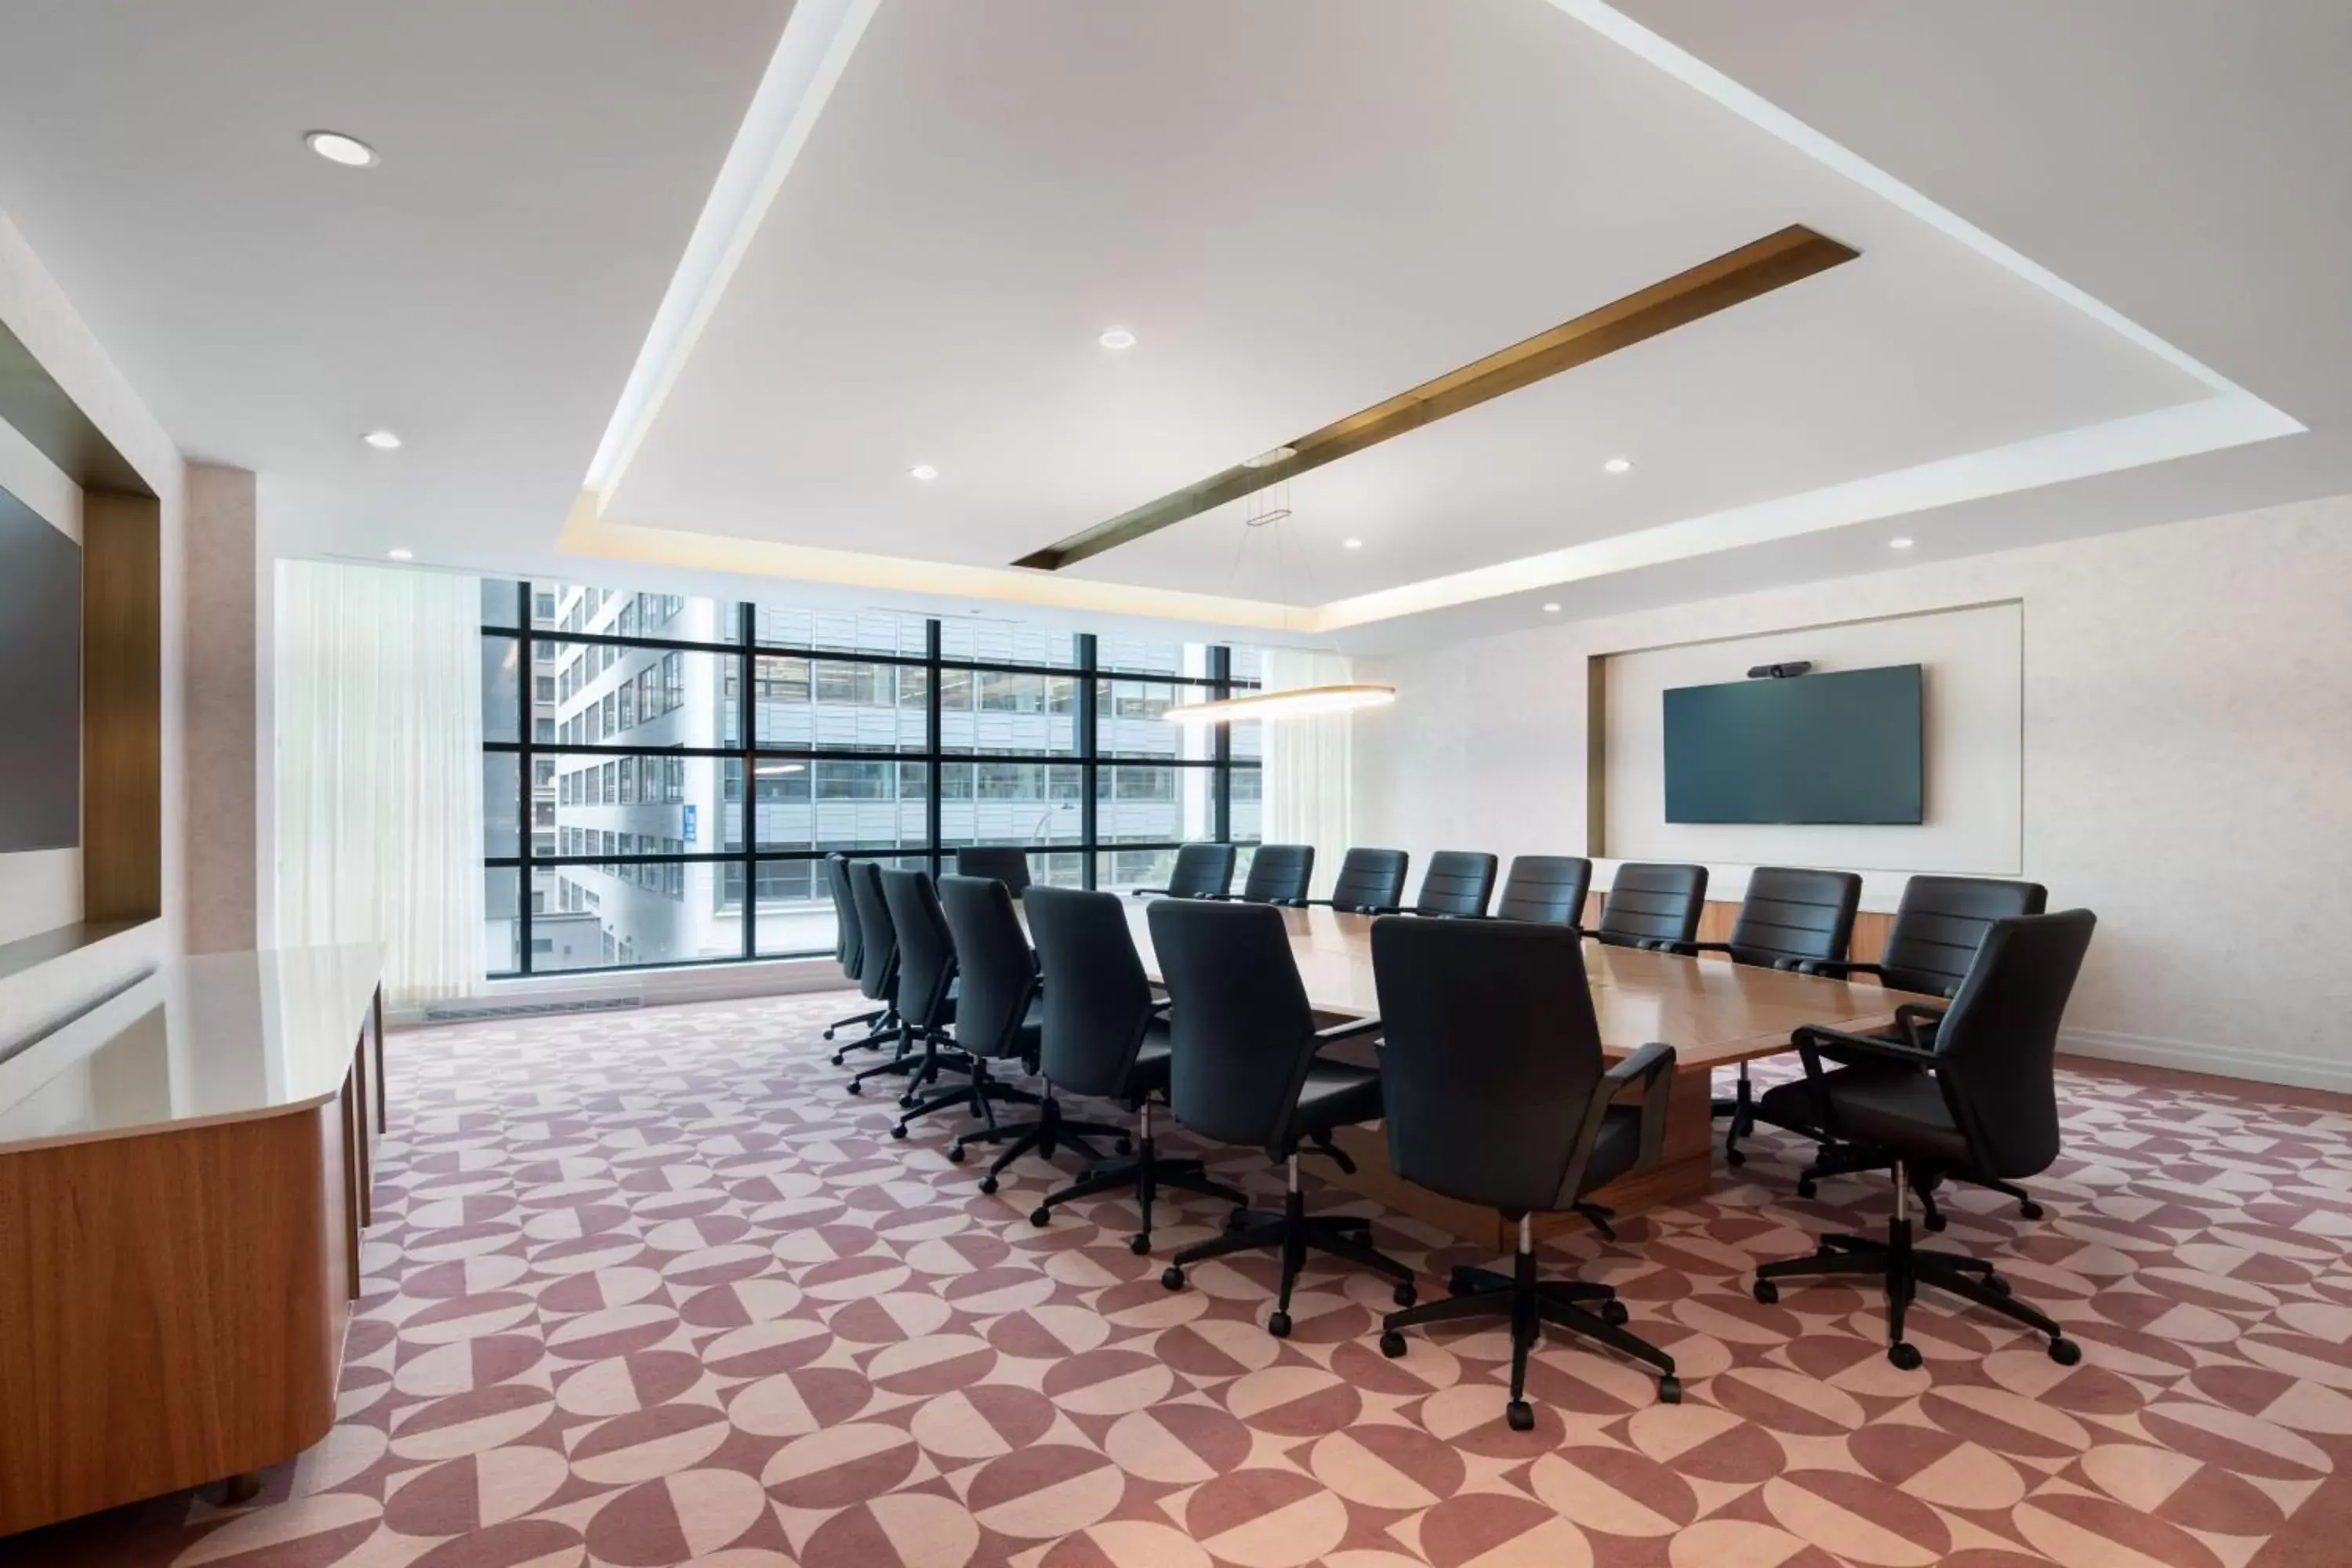 Meeting/conference room in HONEYROSE Hotel, Montreal, a Tribute Portfolio Hotel